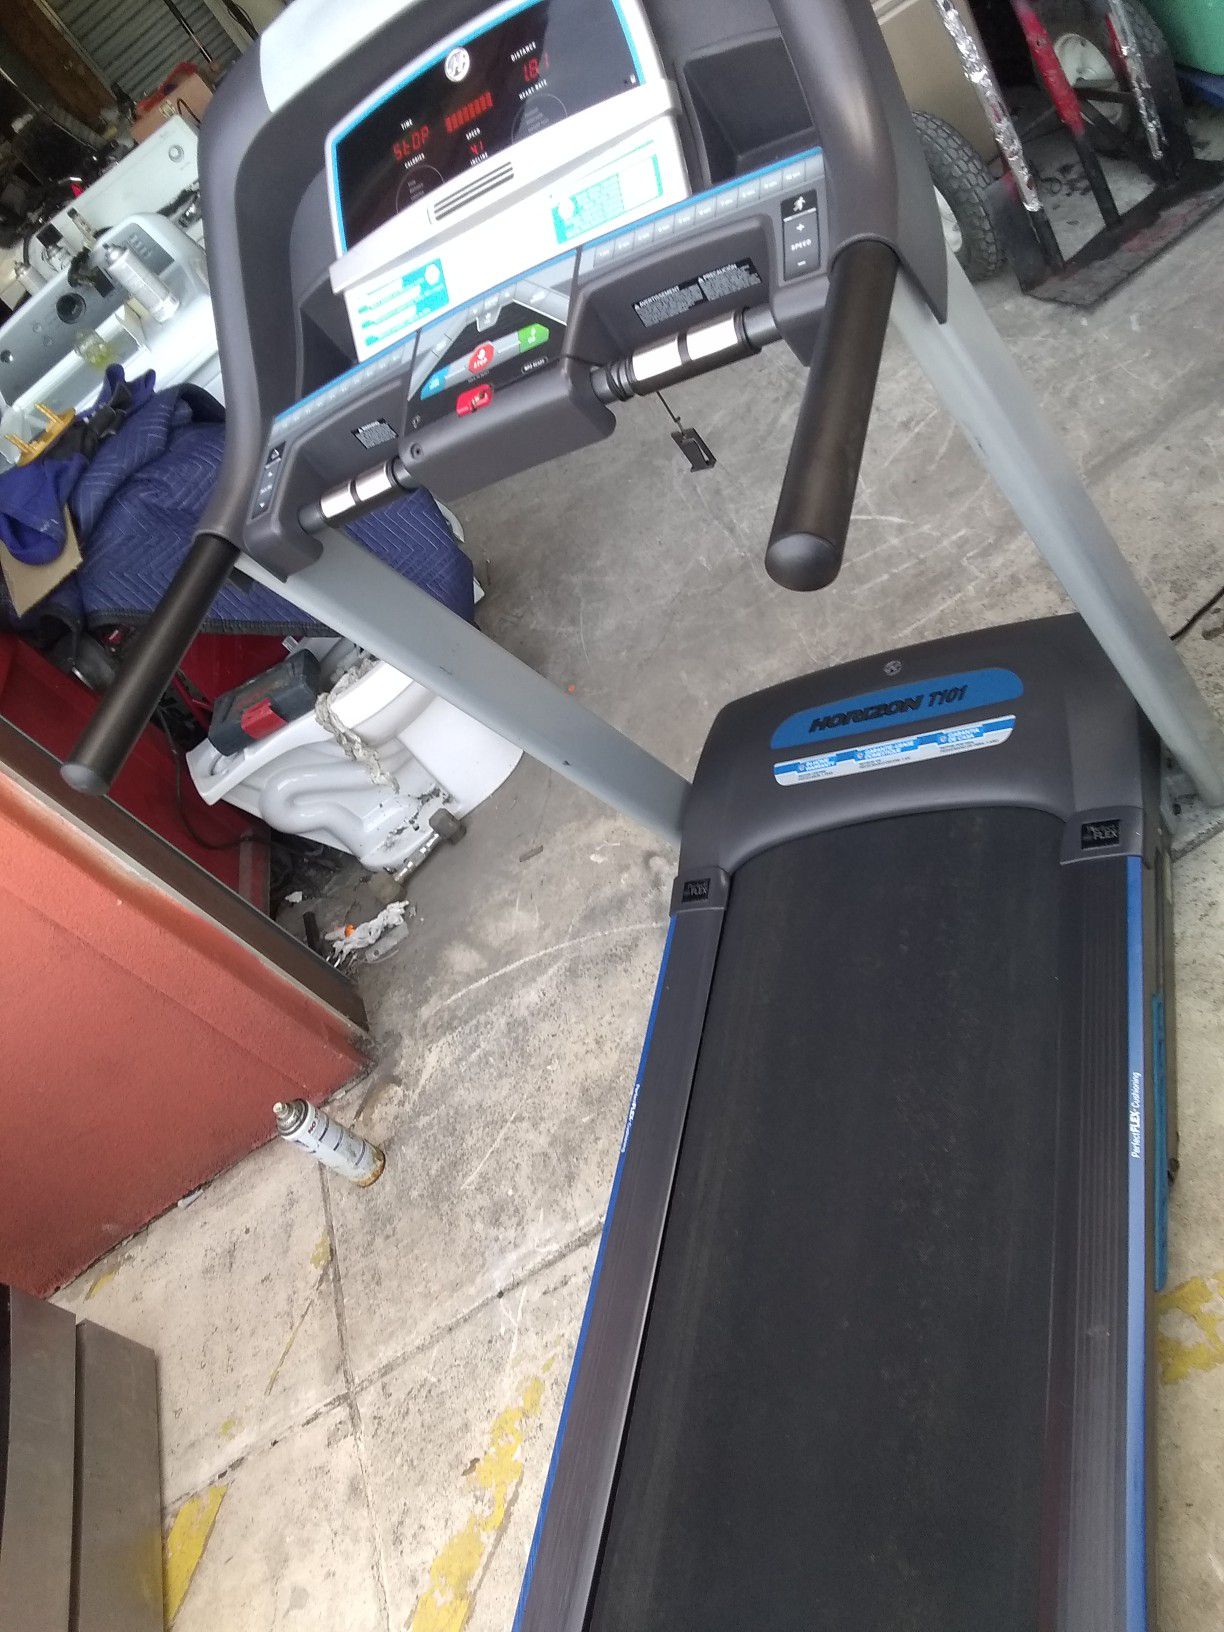 Horizon treadmill in perfect working condition